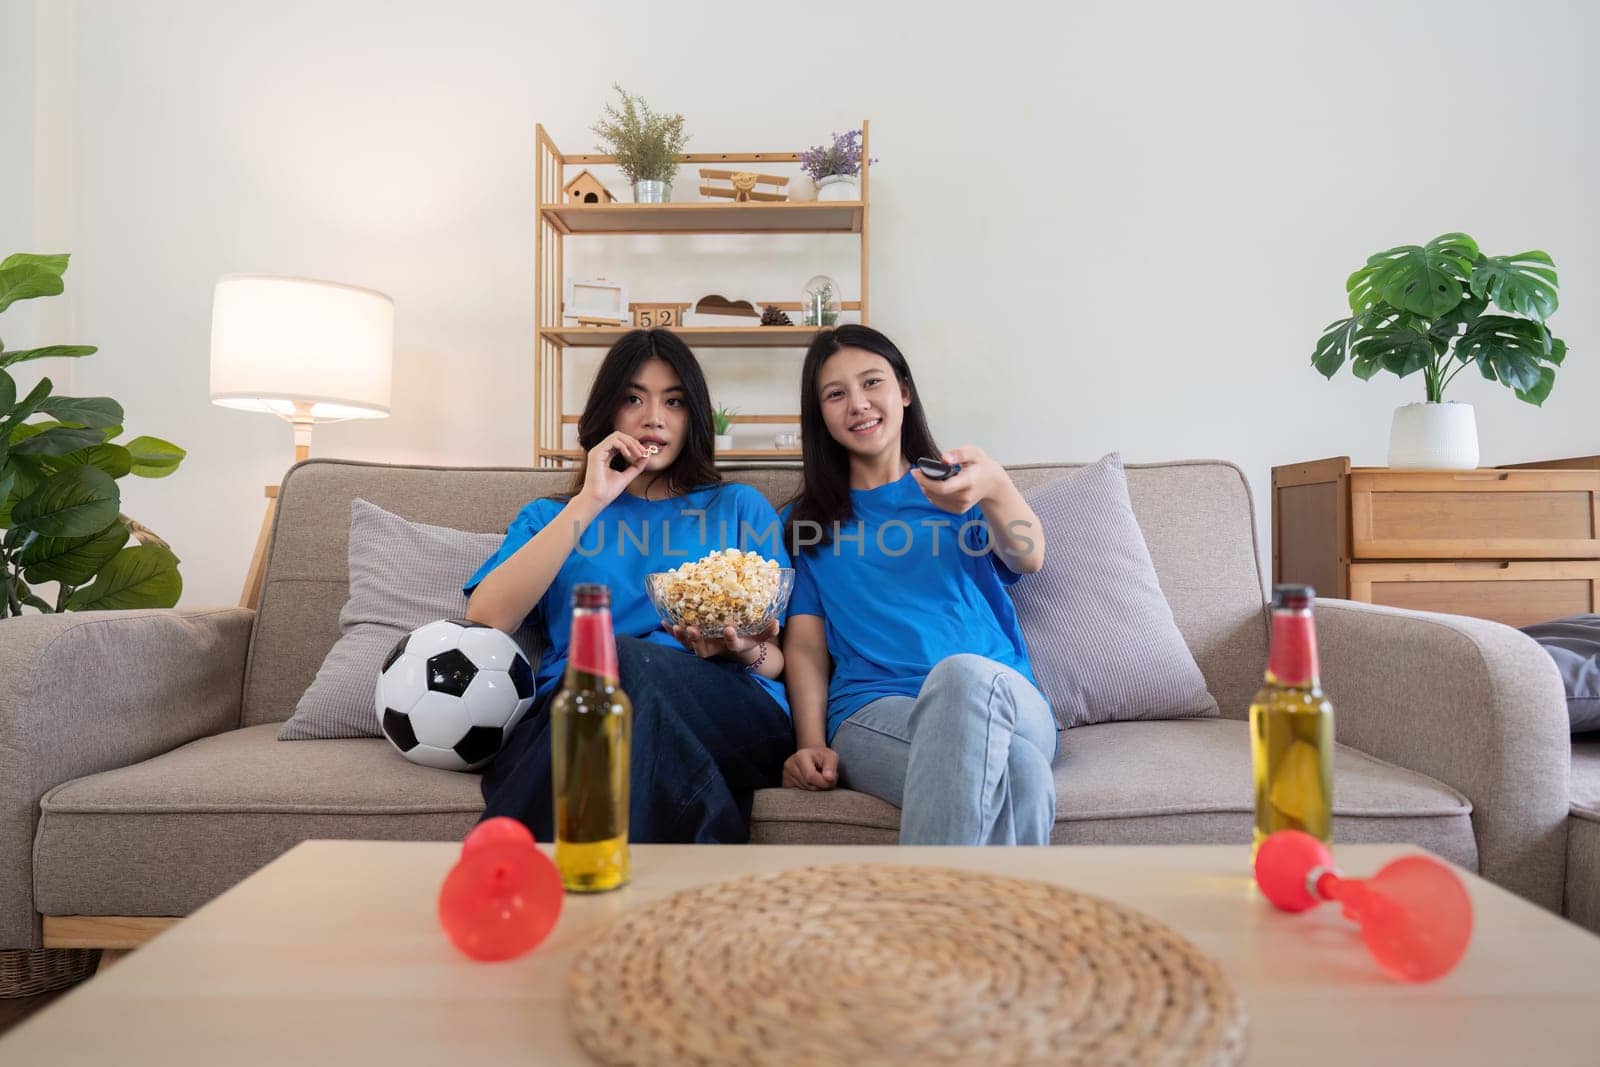 Lesbian couple cheering for Euro football at home with popcorn and drinks. Concept of sports enthusiasm and LGBTQ pride by nateemee